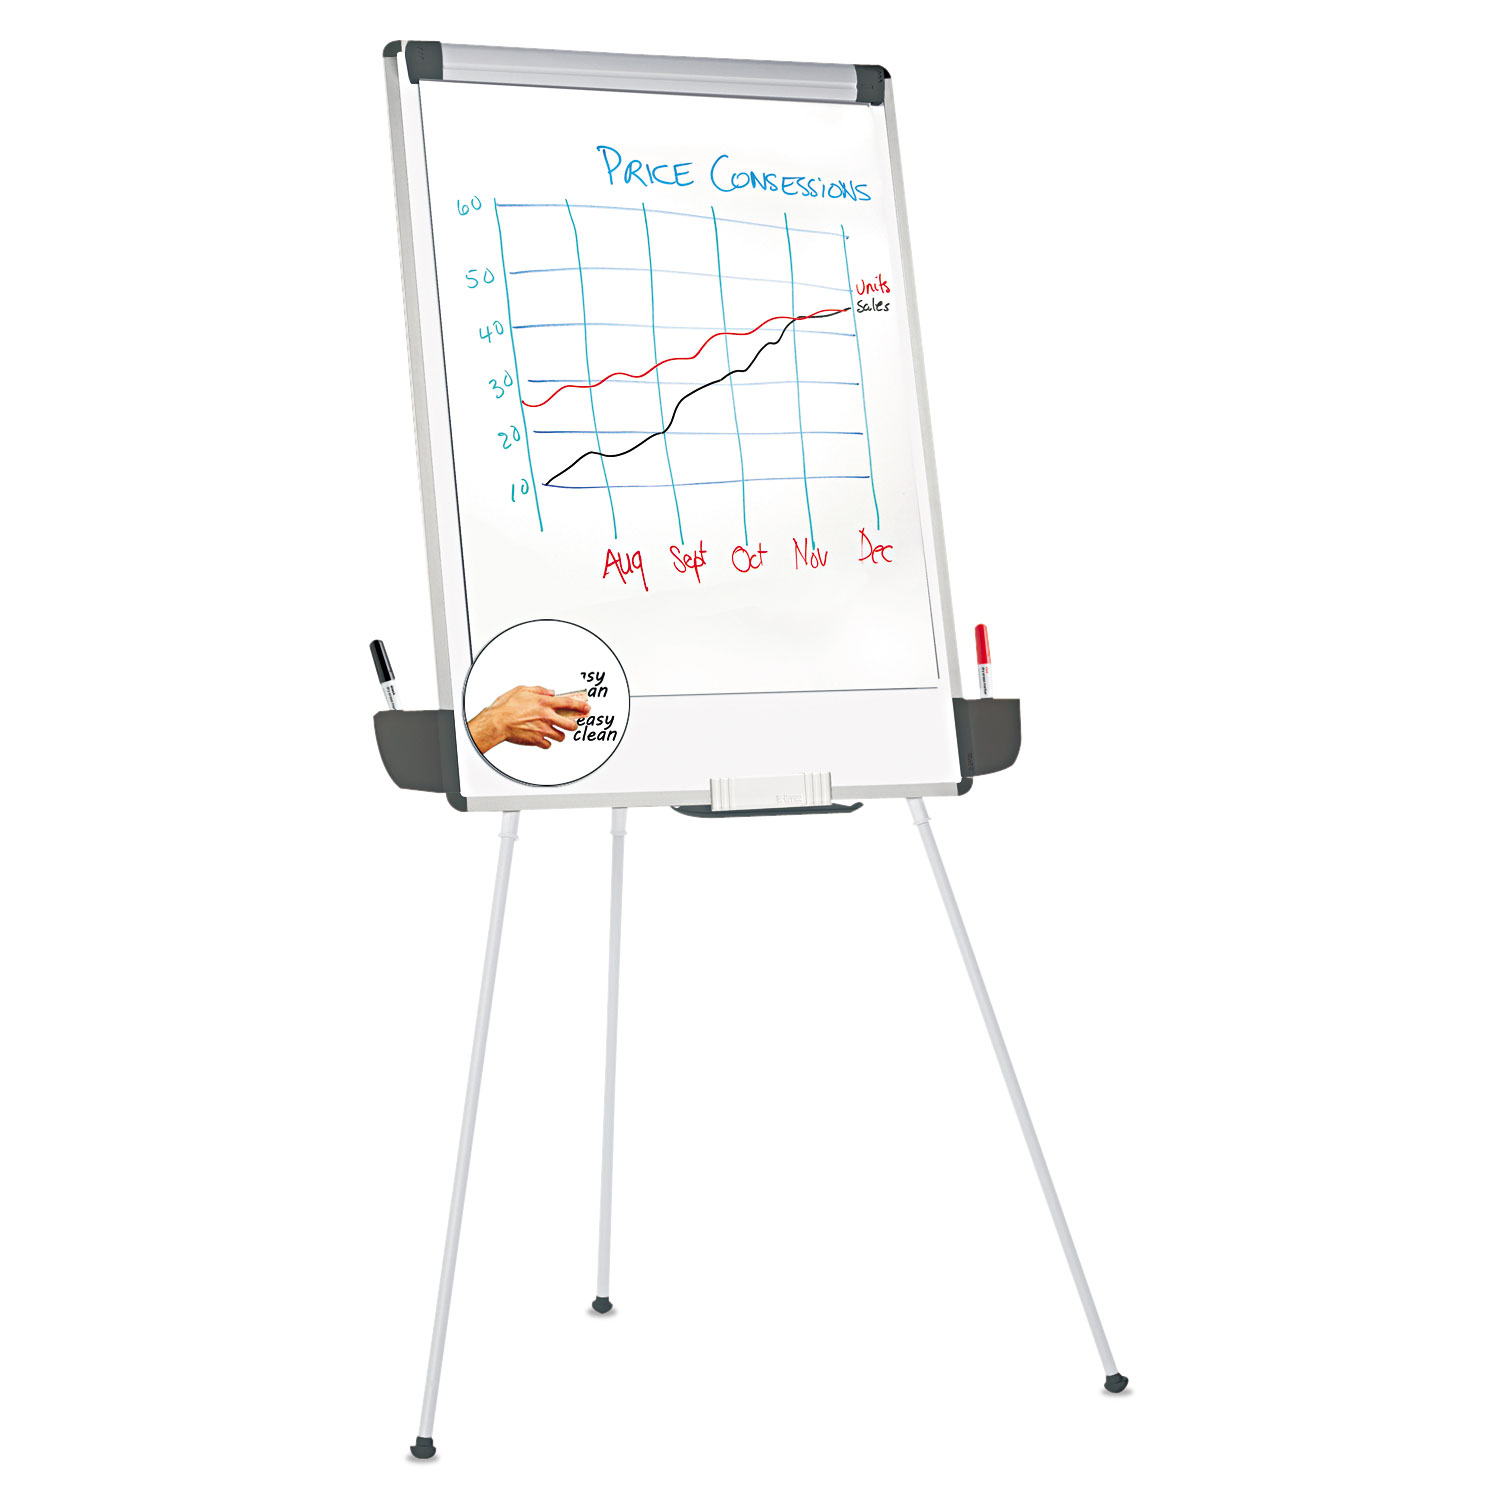 Tripod-Style Dry Erase Easel, Easel: 44" to 78", Board: 29" x 41", White/Silver